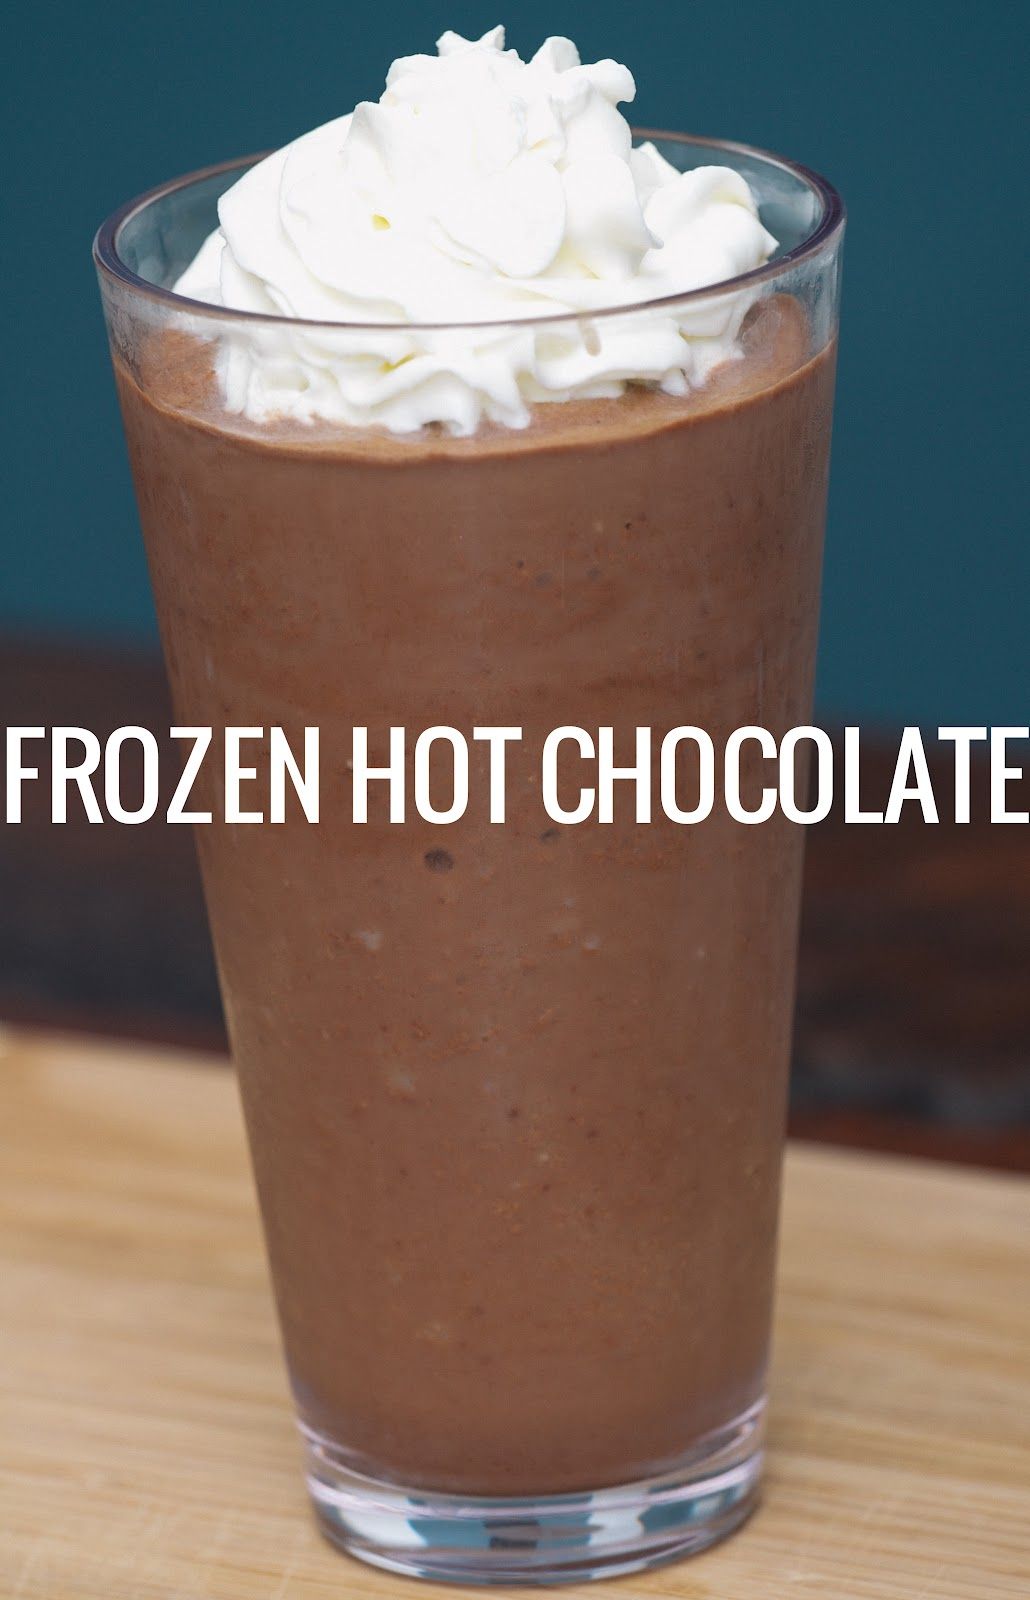 frozen hot chocolate – recipe from Serendipity Cafe in NYC. Gotta try!